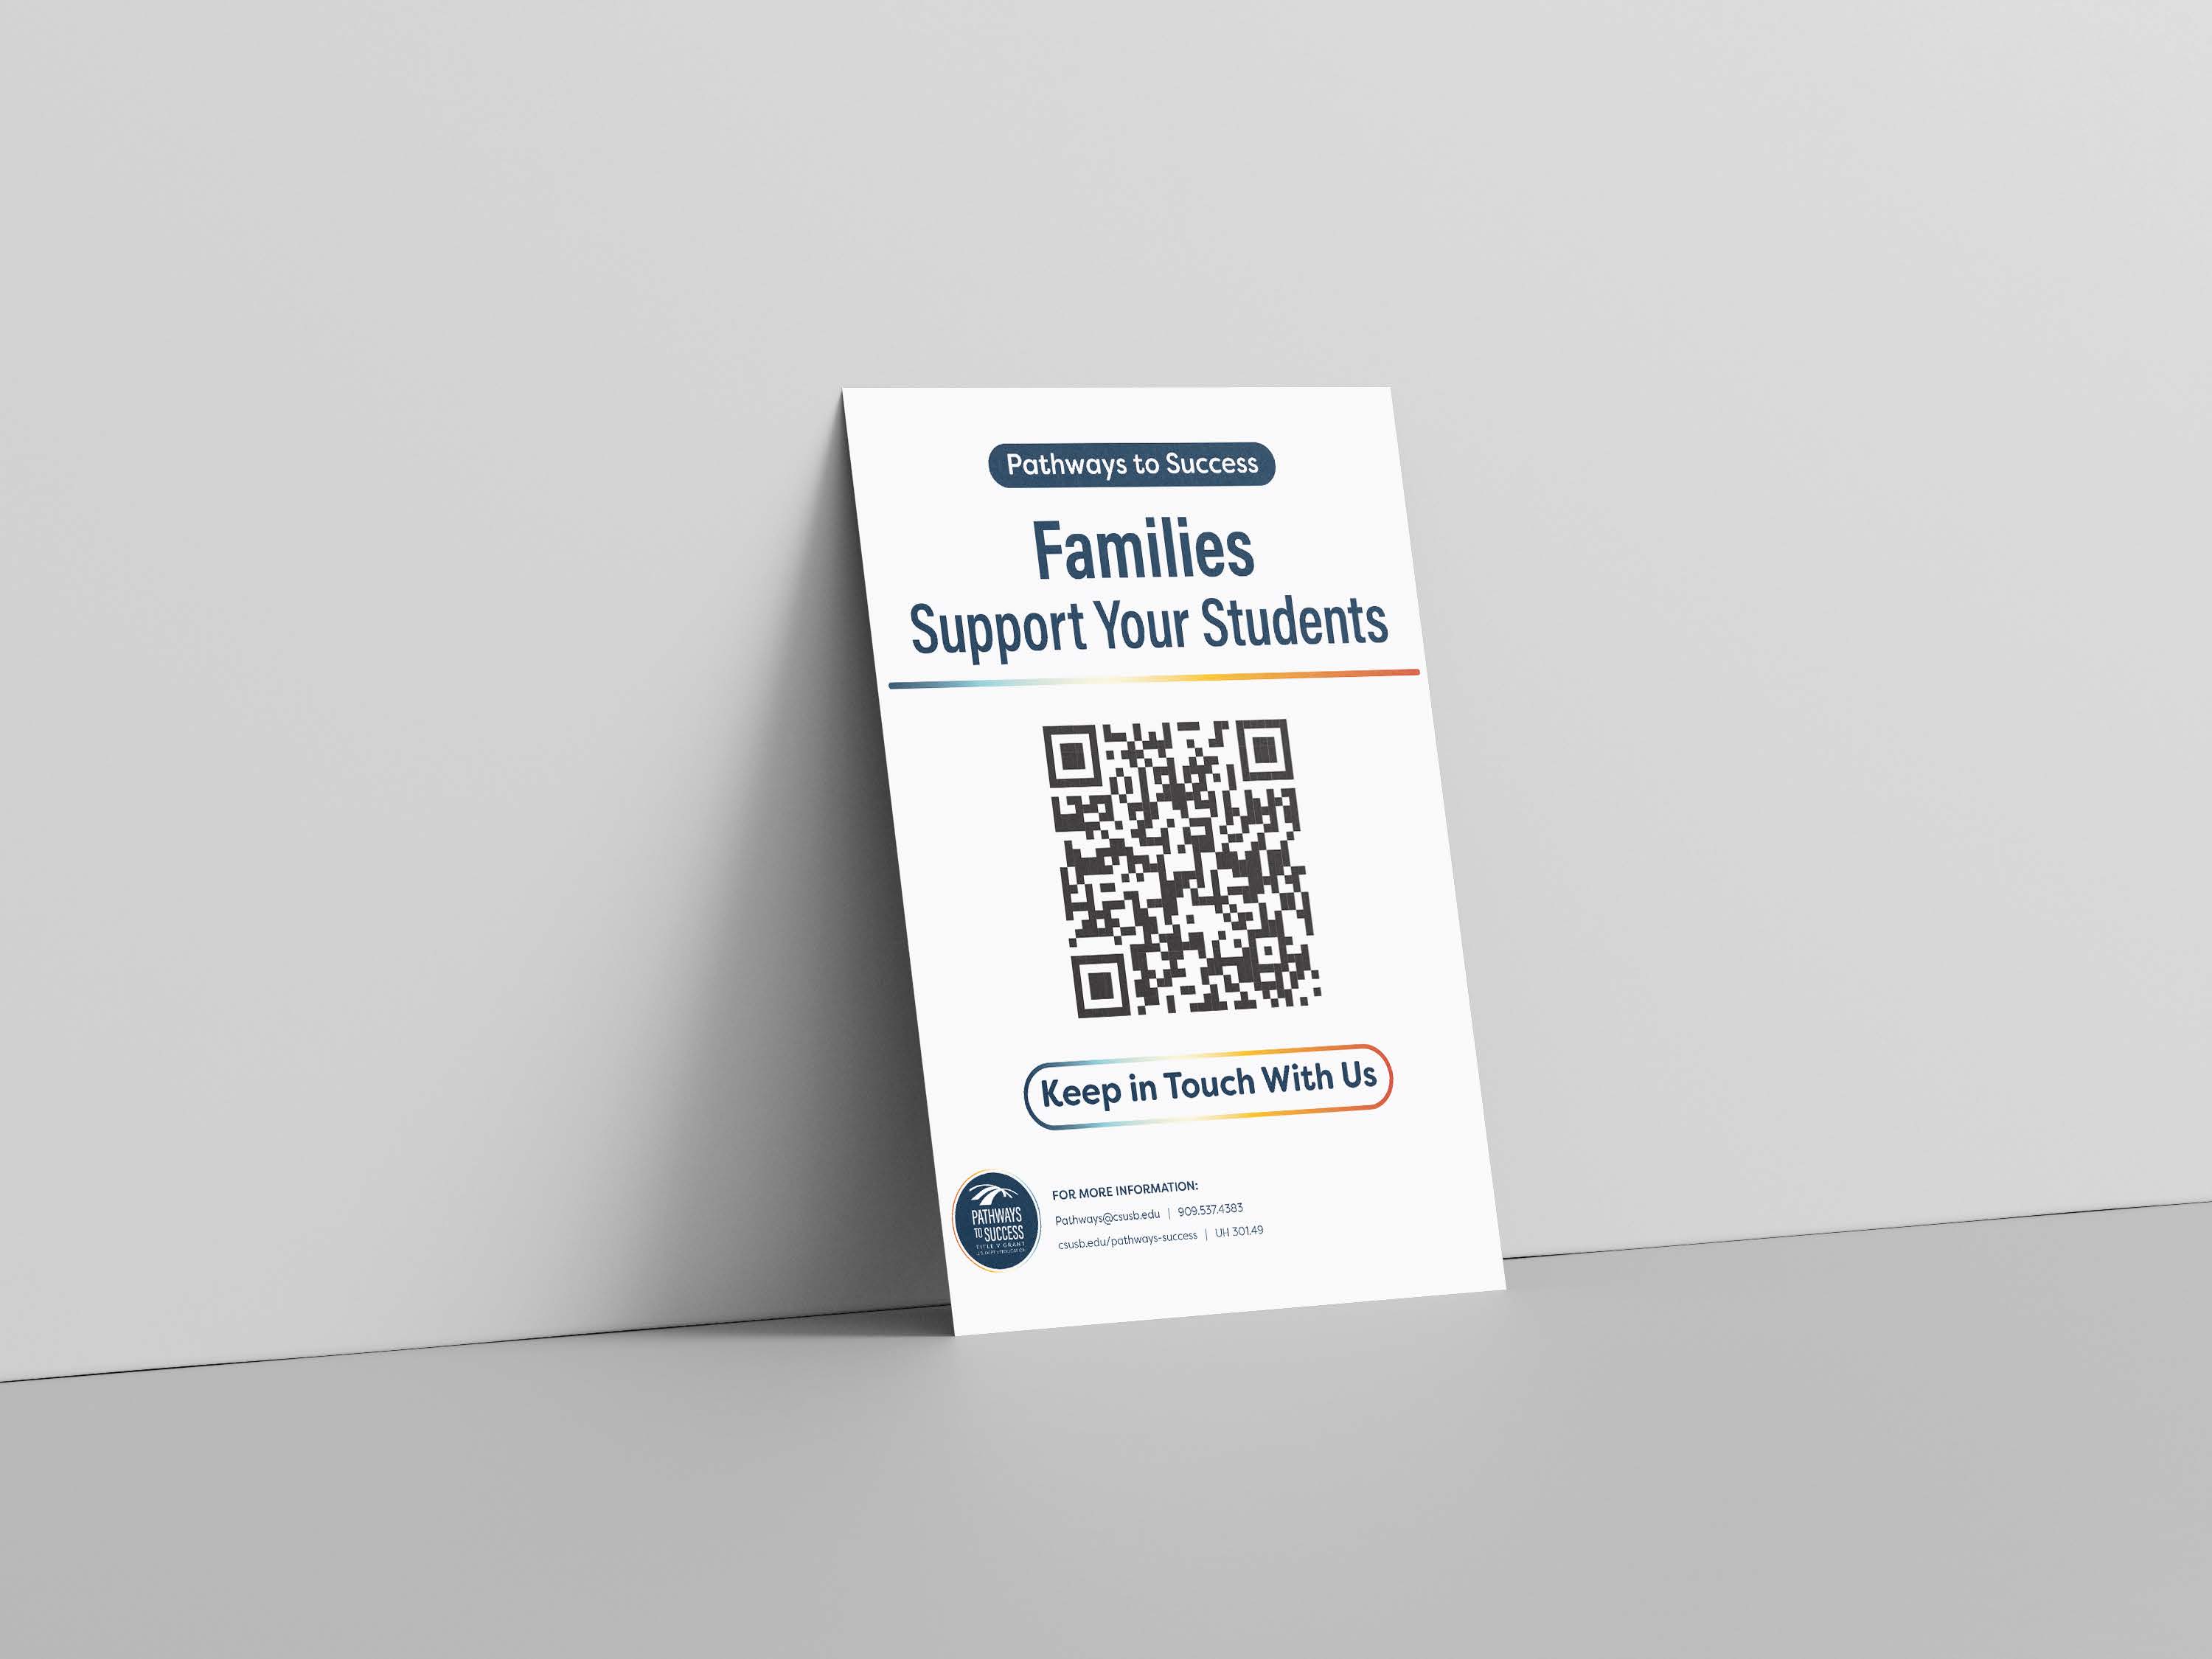 A flyer with a qr code explaining how parents can support their students. This was placed at tabling events.